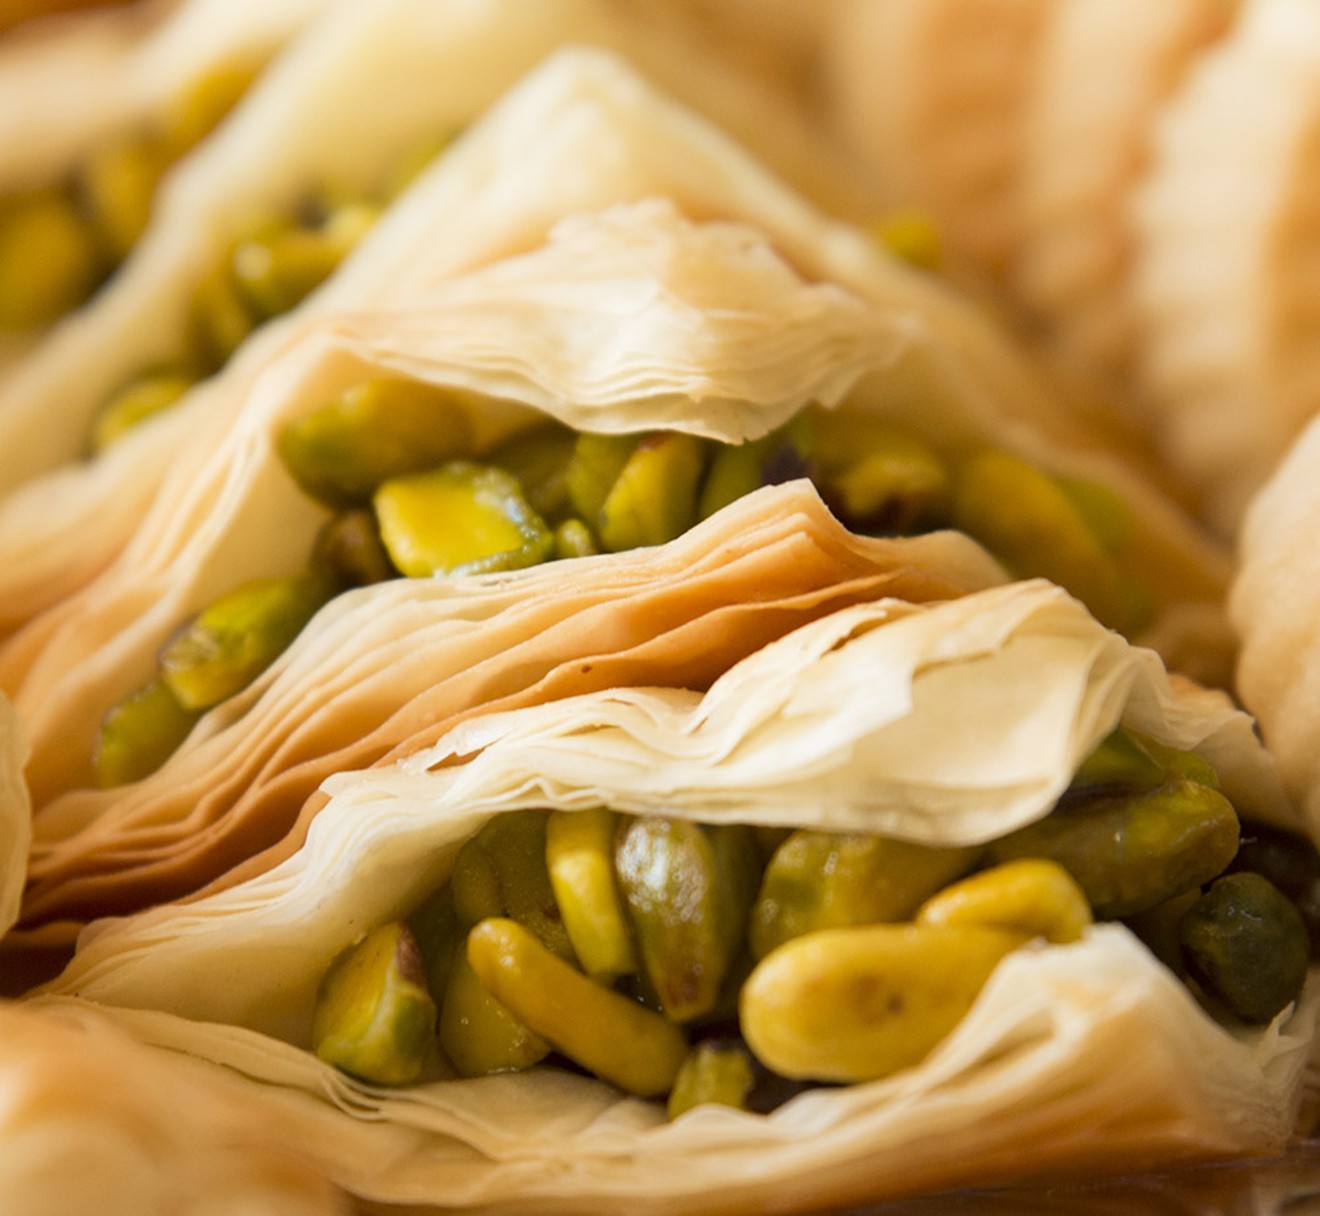 Nutty, buttery Baklava from local Syrian bakers